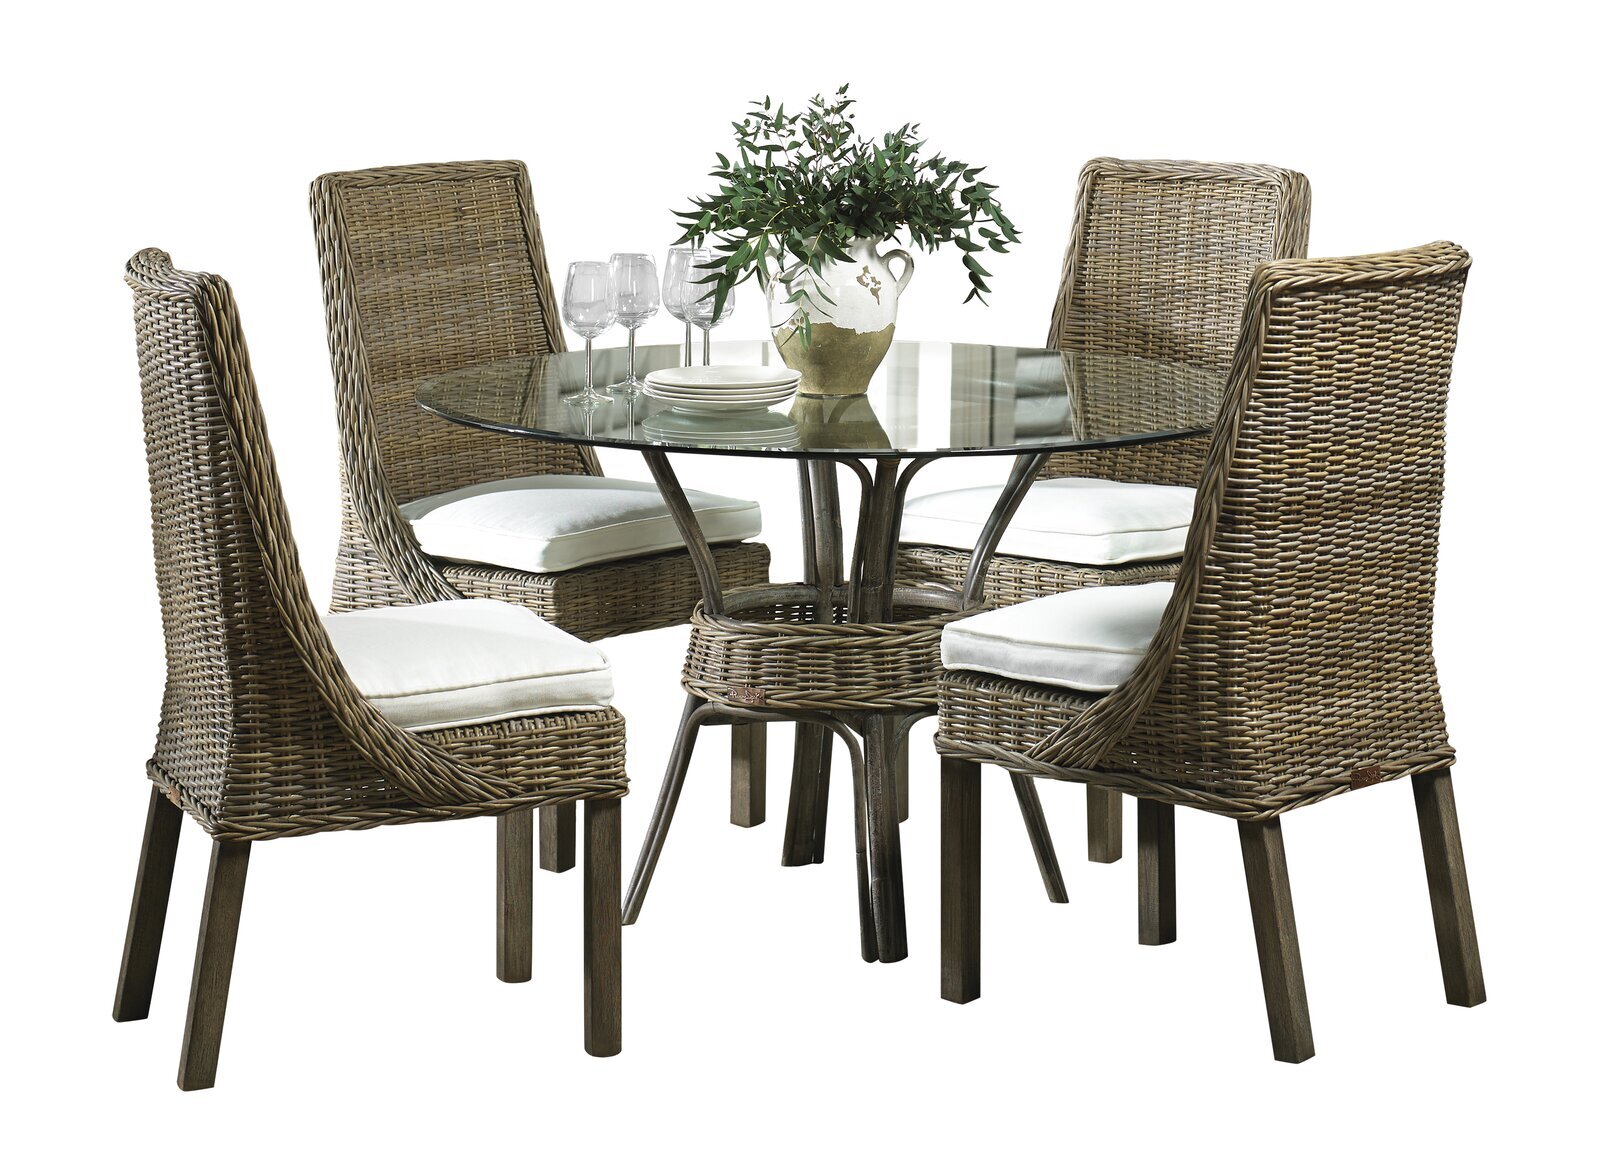 A glass and rattan round dining set for 4 